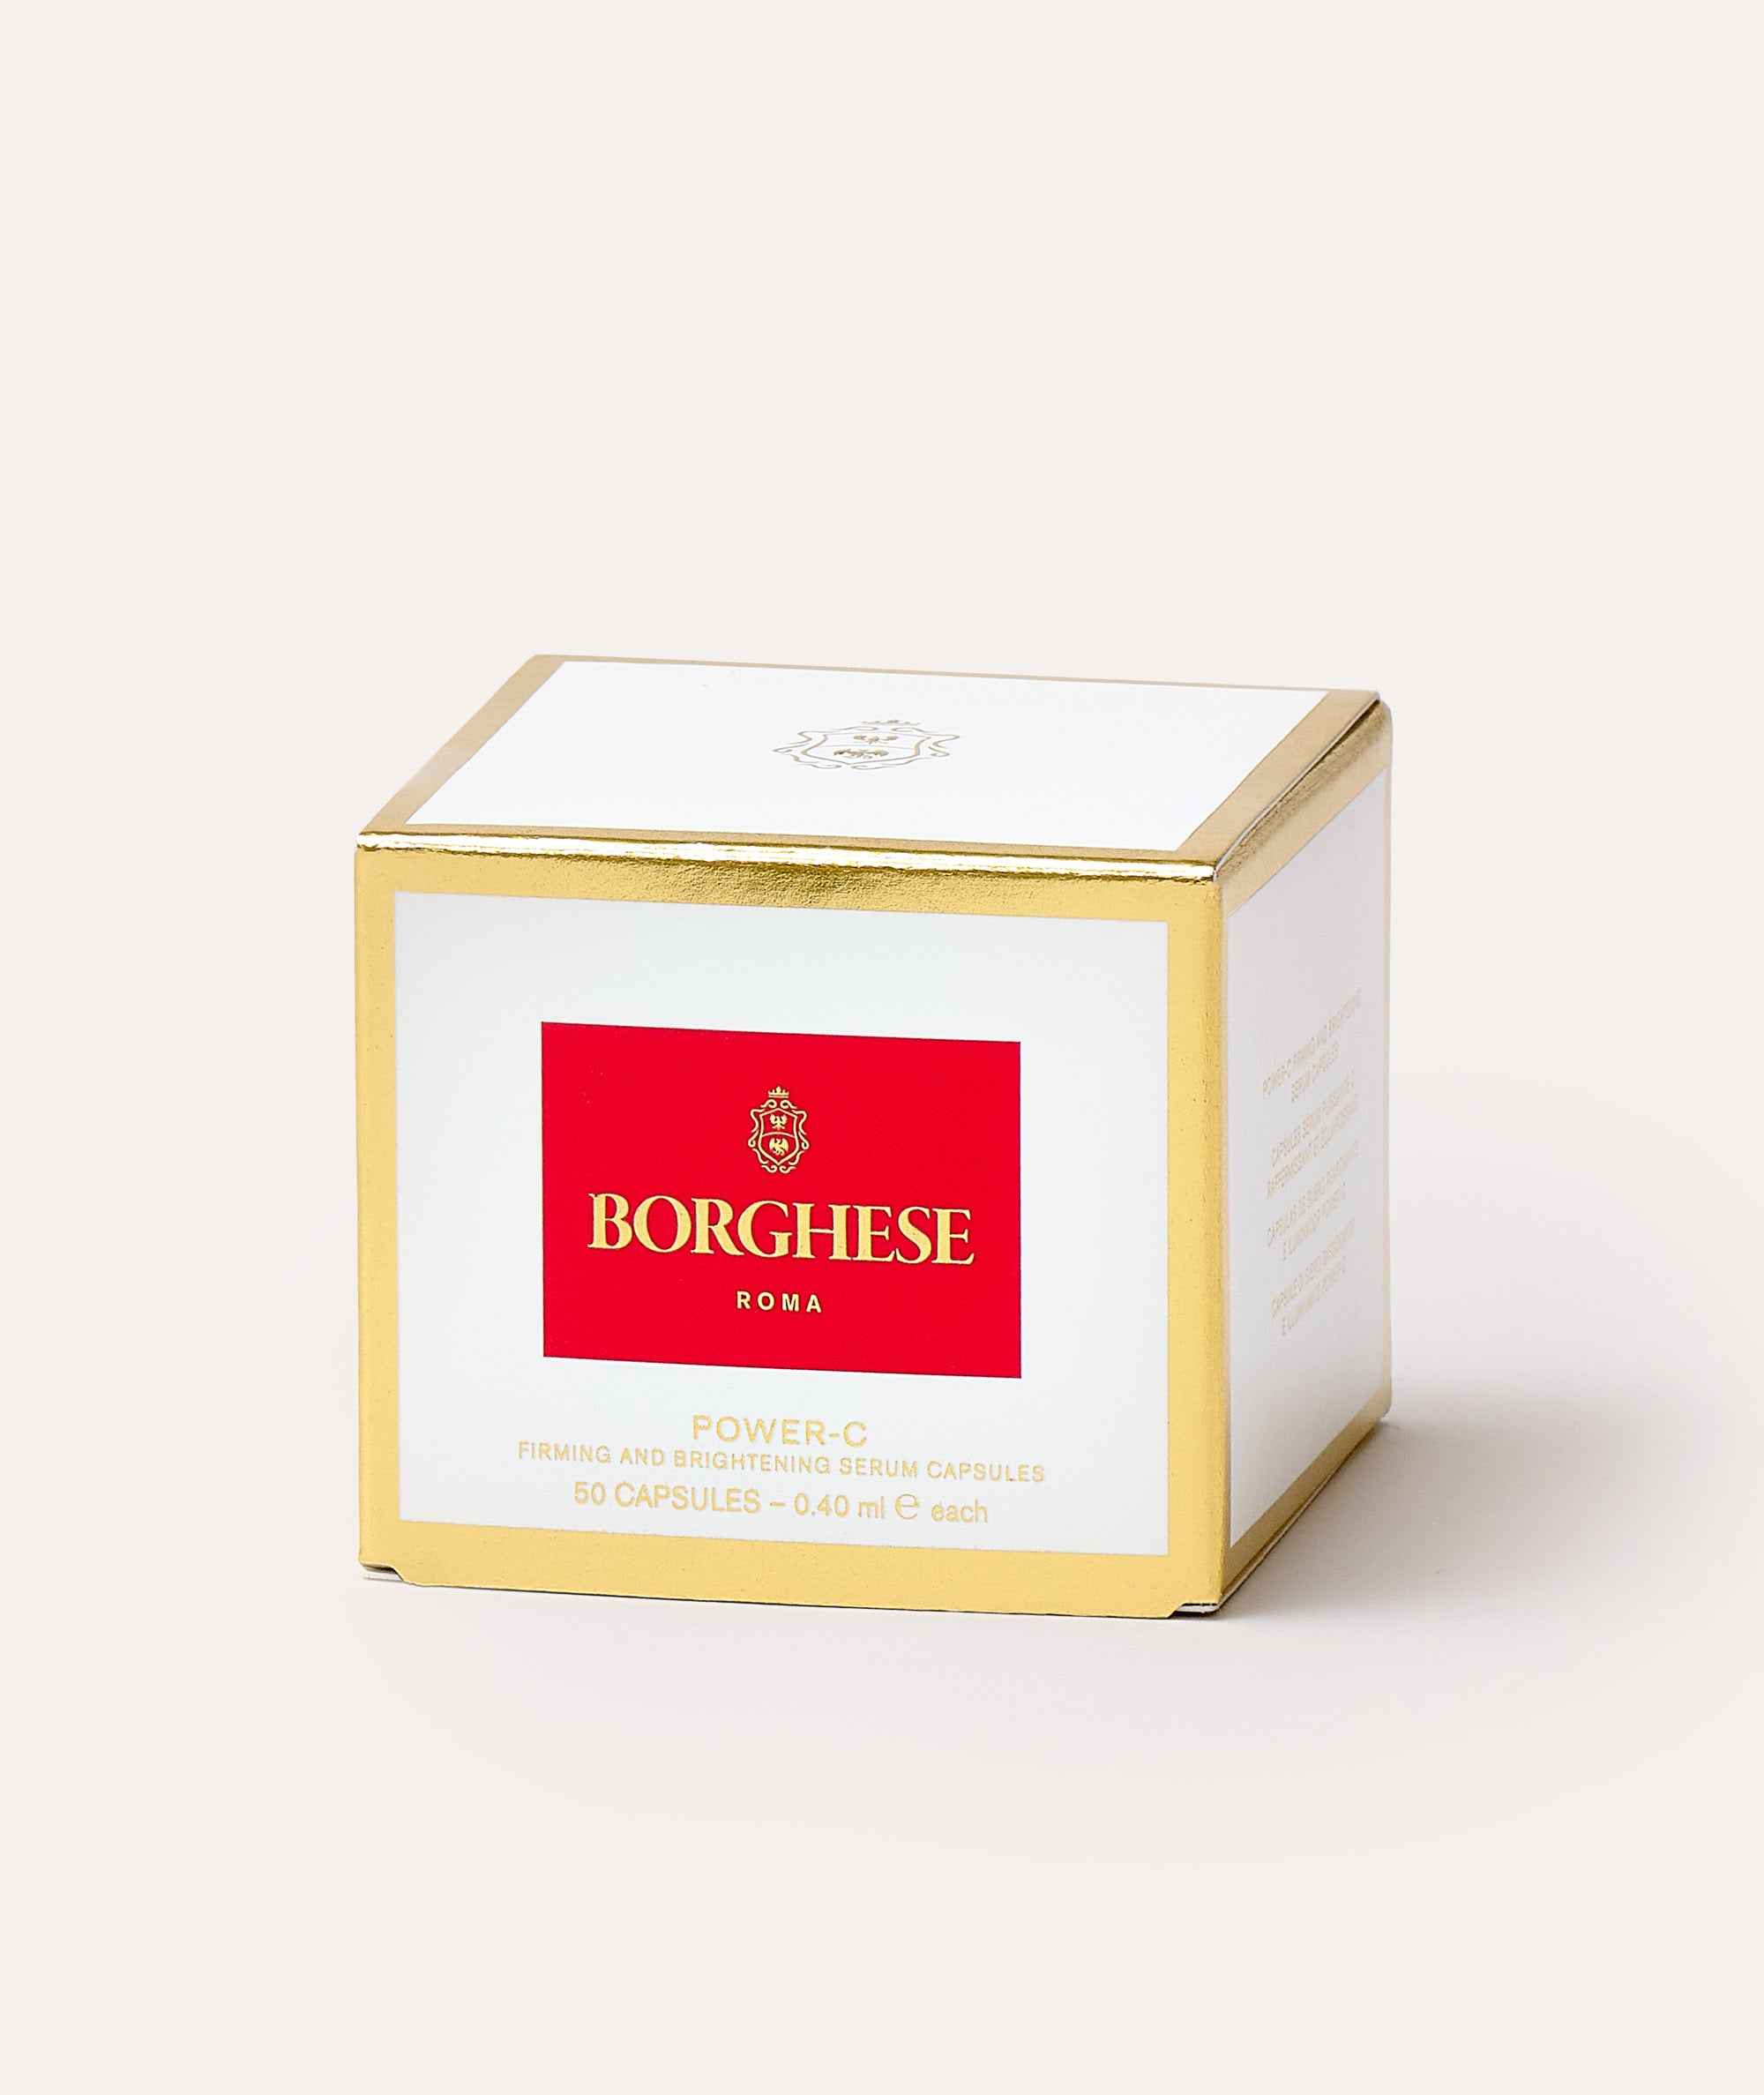 This is a picture of the Borghese Power-C Firming & Brightening Serum Capsules in a box